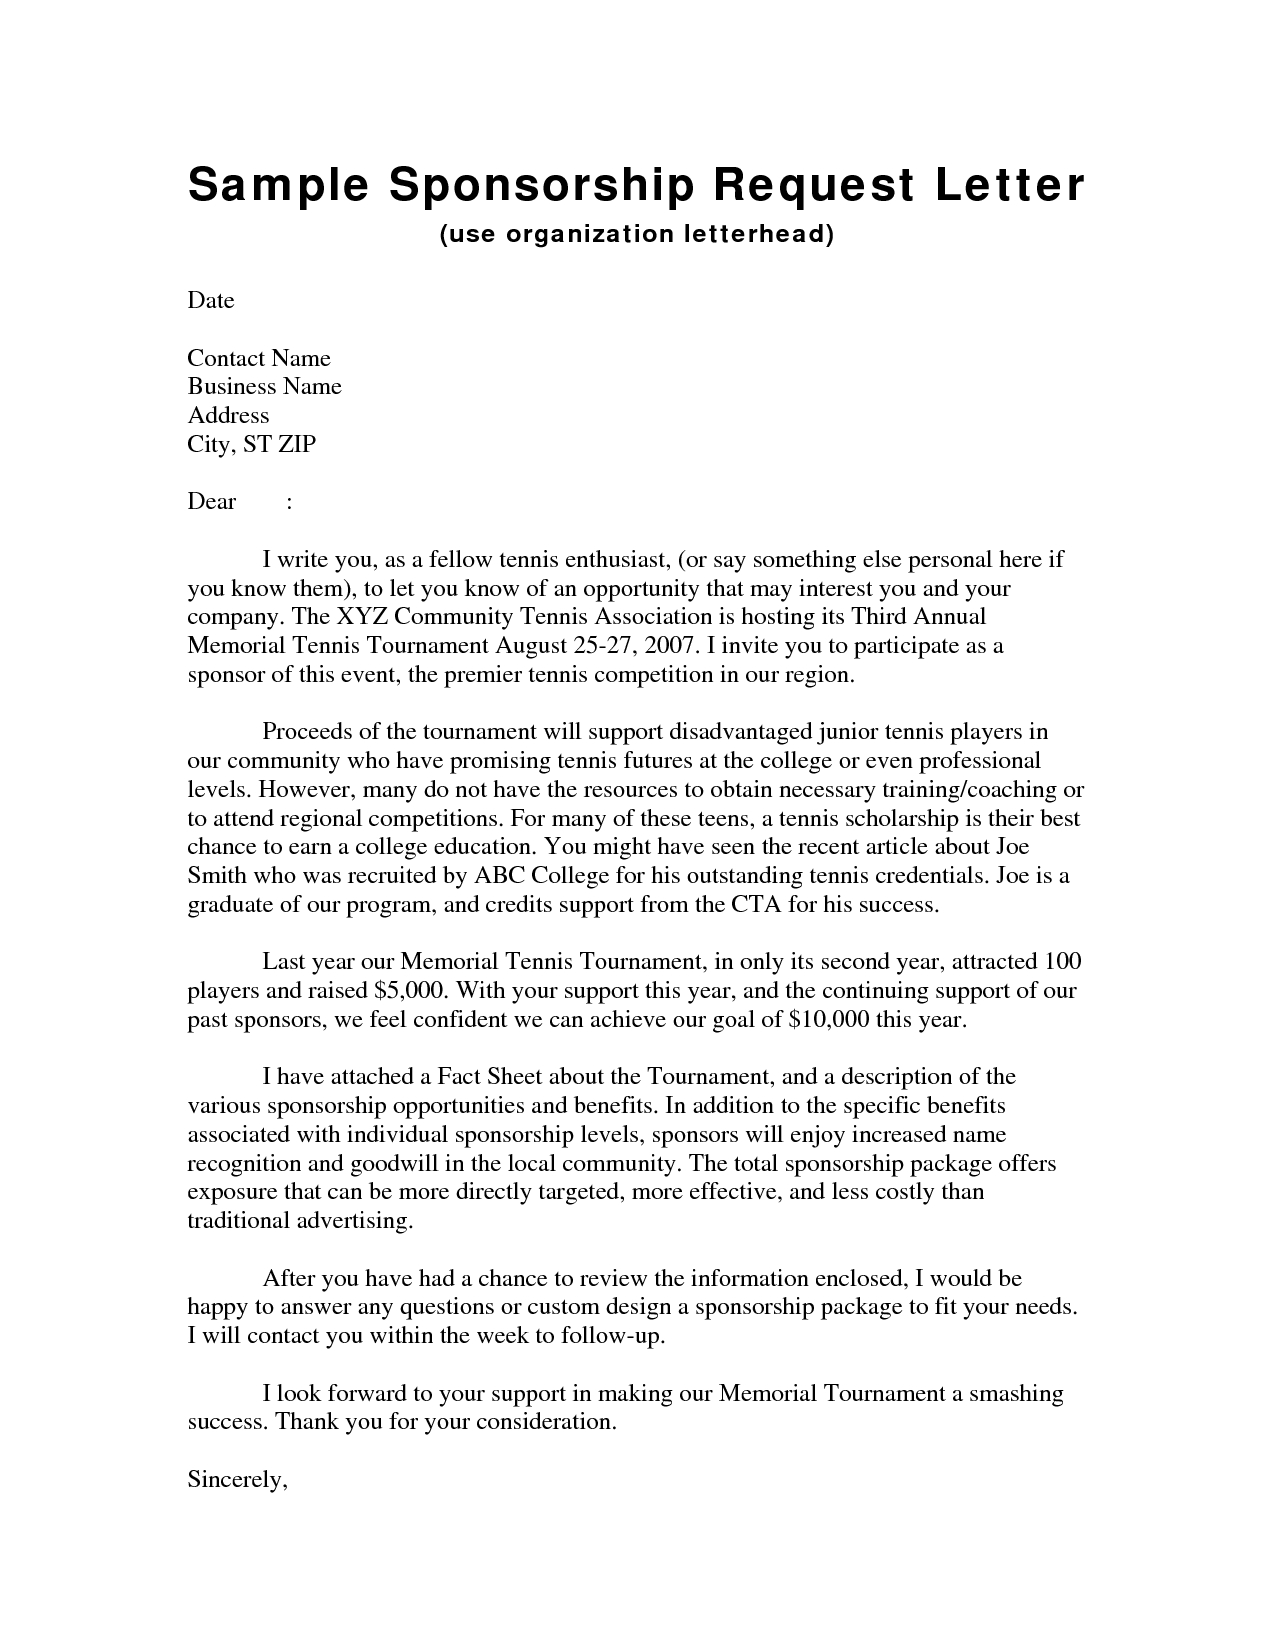 Sponsorship Letter Template - How to Write A Letter Requesting Sponsorship Gallery Letter format